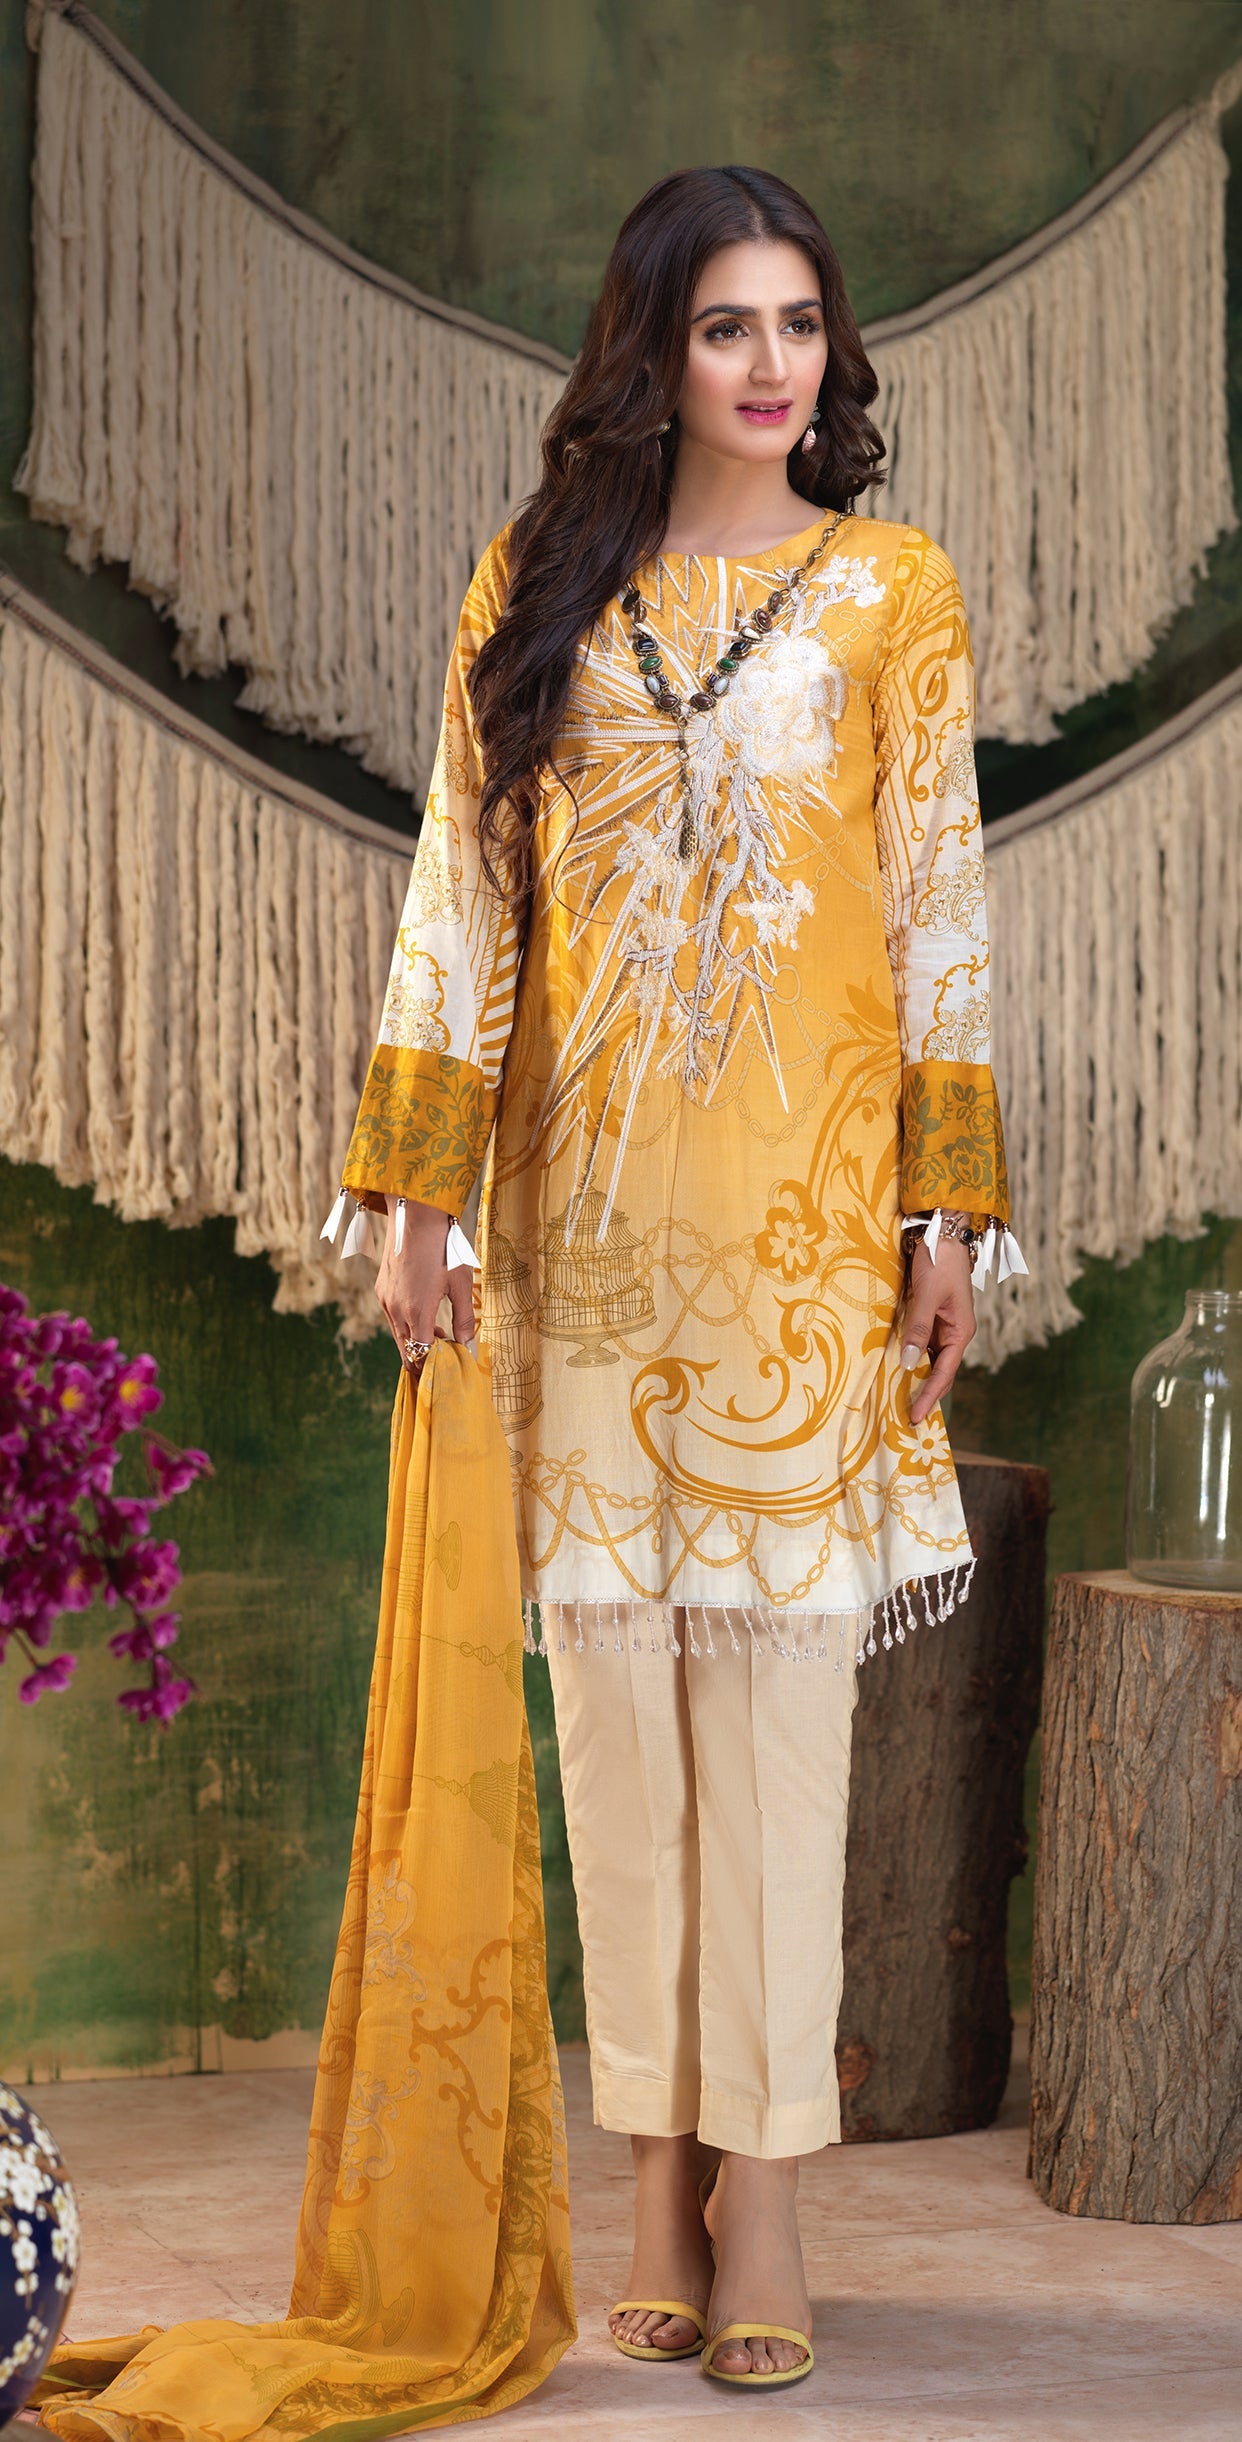 Stitched Printed Lawn Shirt with Embroidered Front , Printed Chiffon Dupatta & Cambric Trouser I Z'ure 3pc (WK-315A) - SalitexOnline